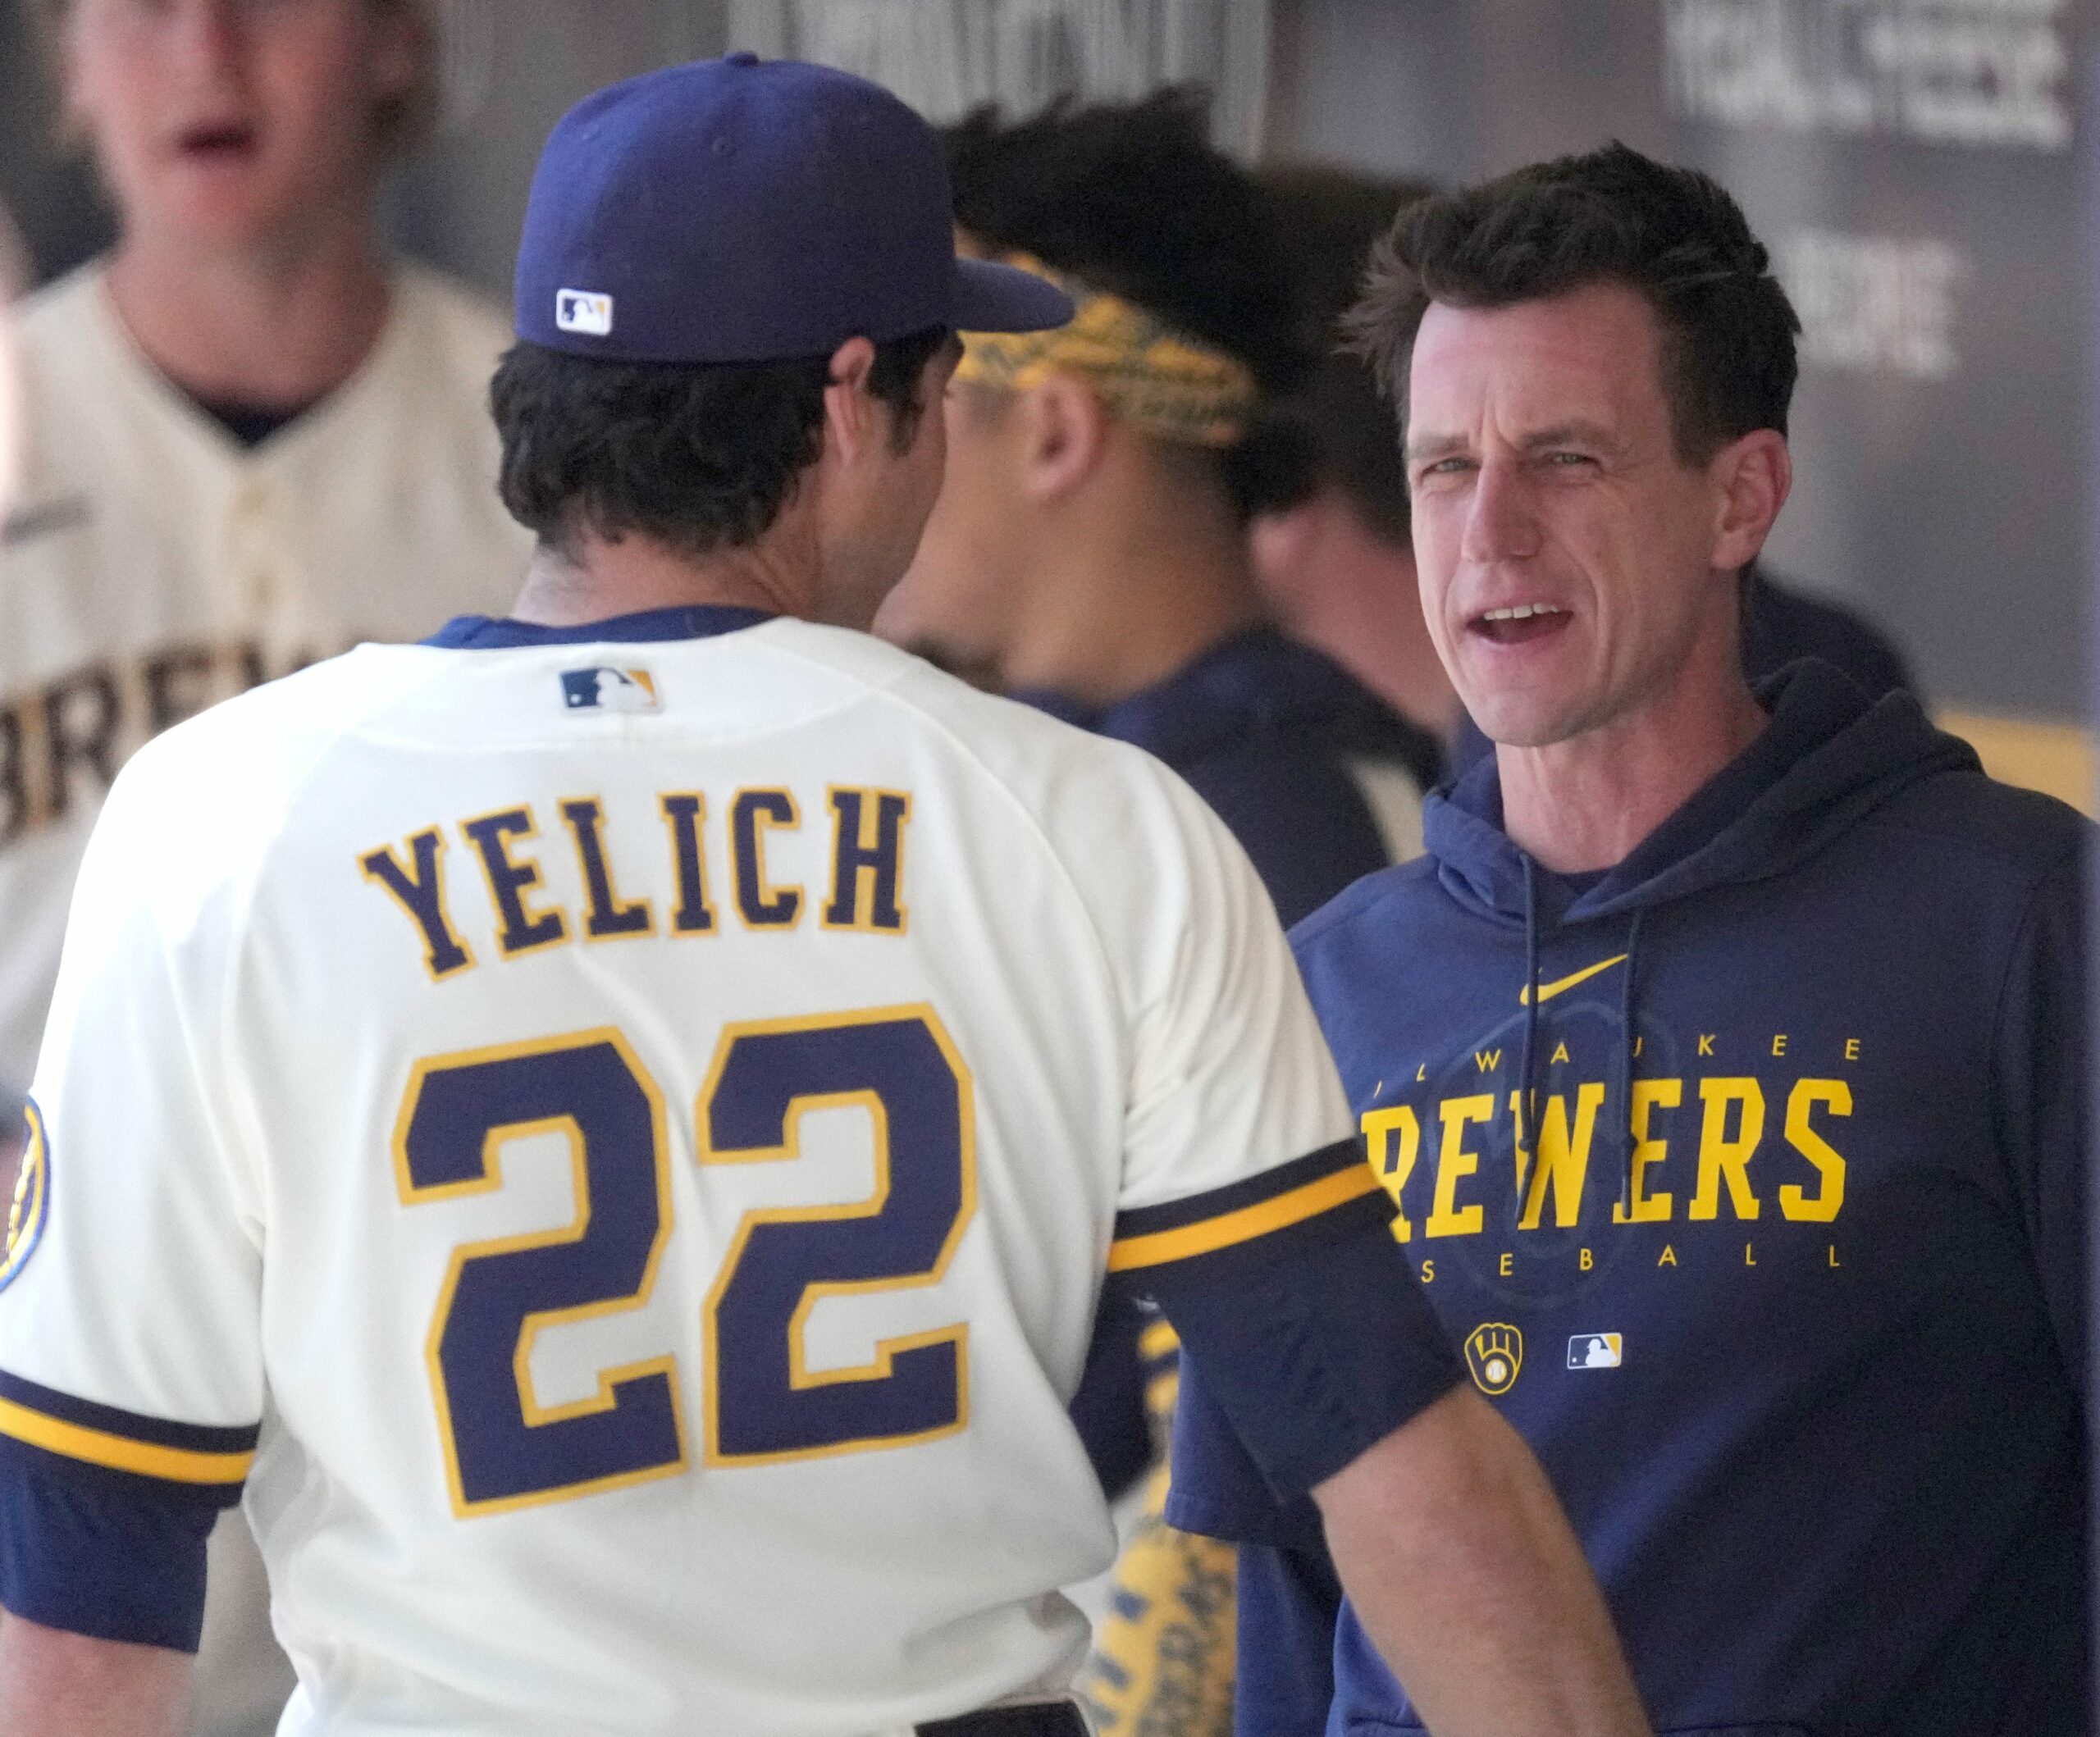 Brewers manager Craig Counsell